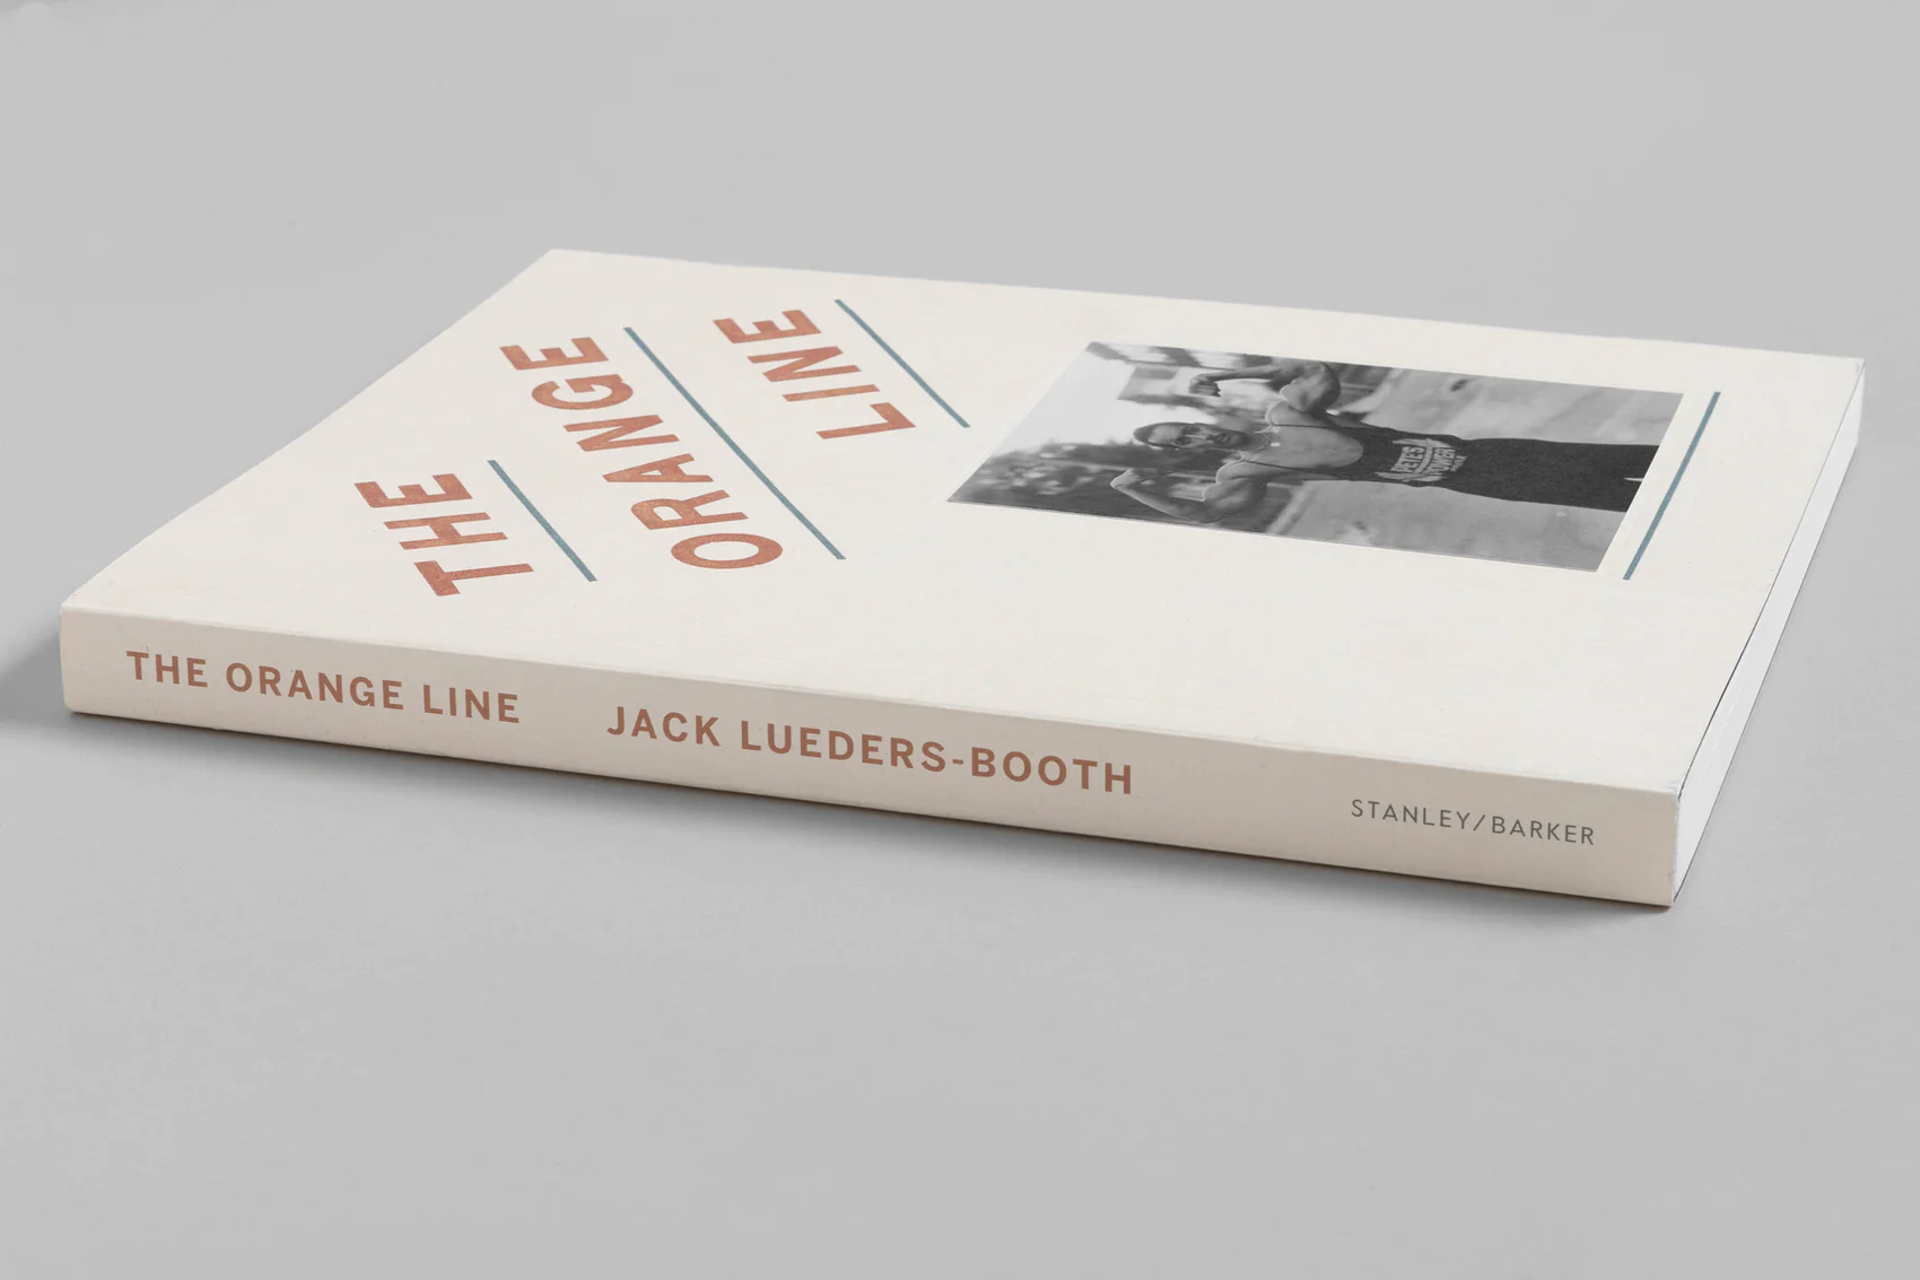 The Orange Line | Jack Lueders - Booth by STANLEY/BARKER